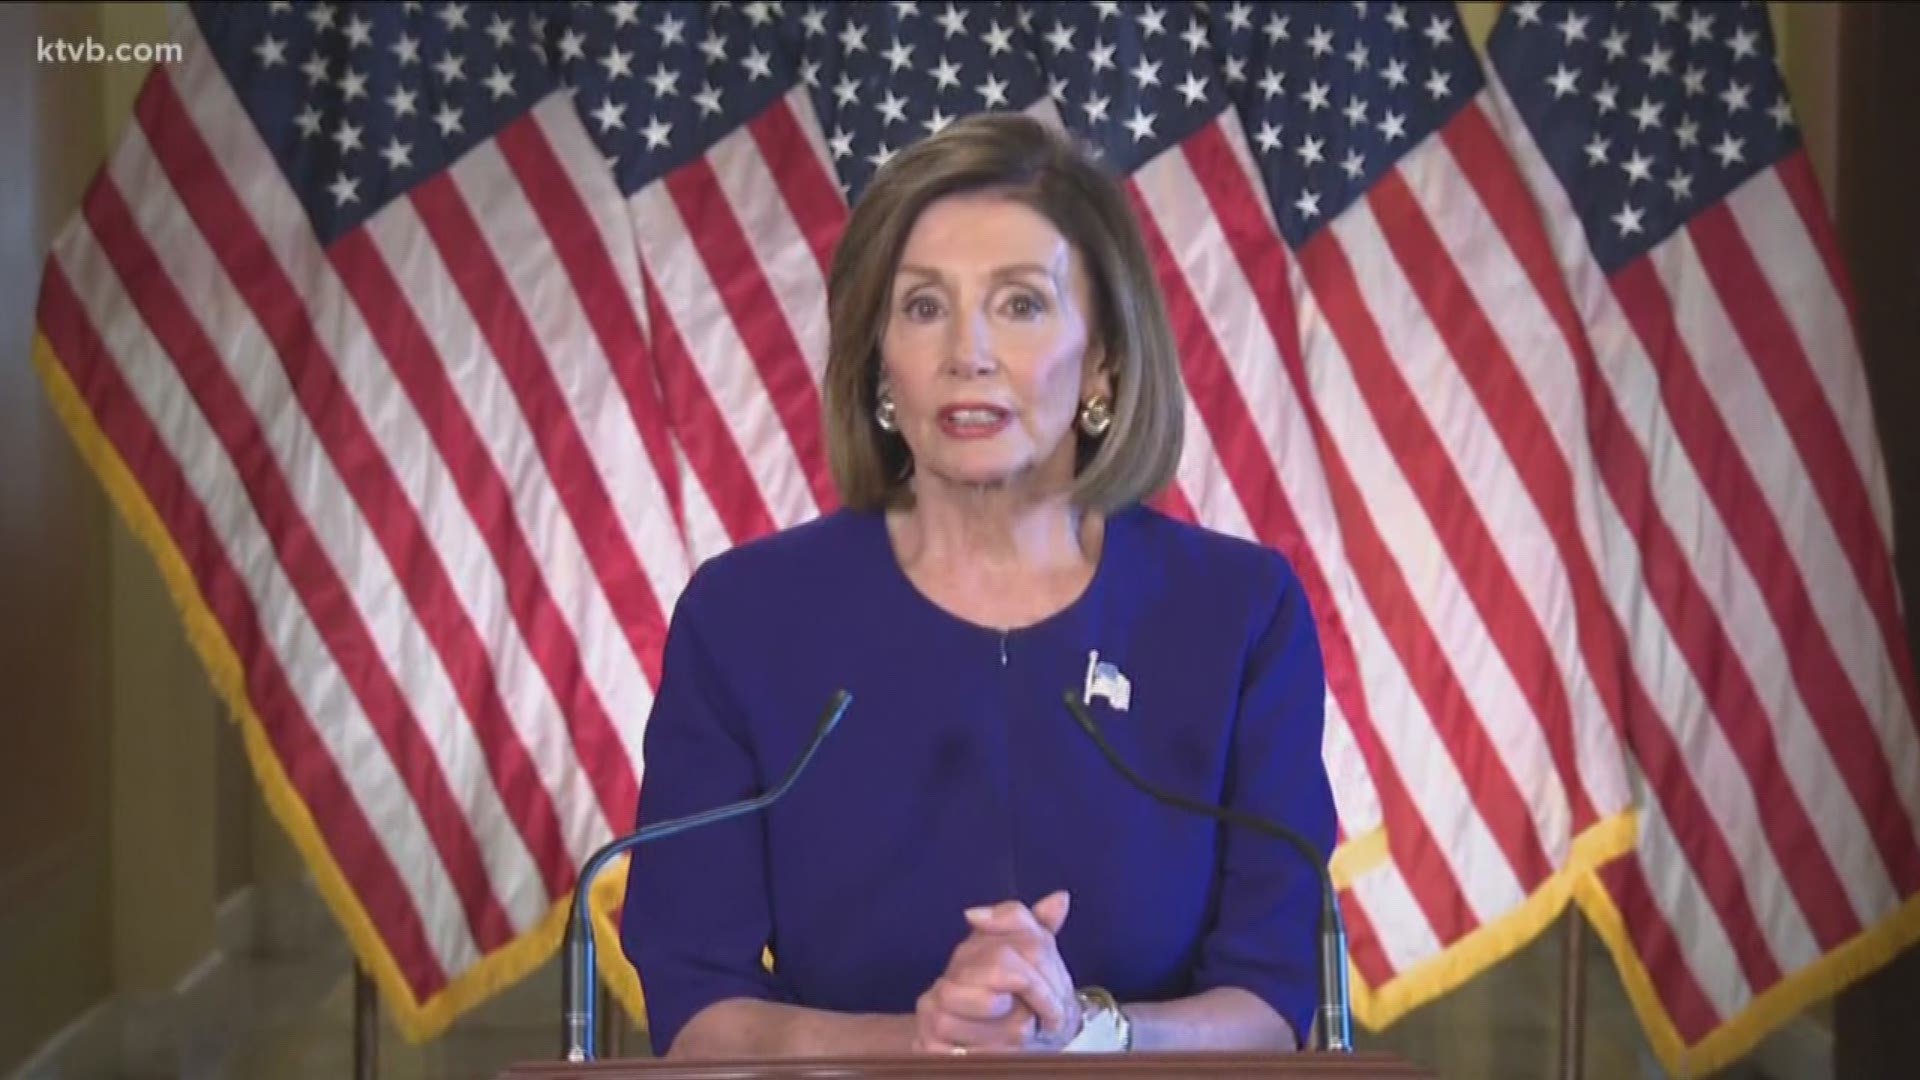 Idaho's congressional leaders are weighing in after House Speaker Nancy Pelosi announced the opening an impeachment inquiry into President Donald Trump.